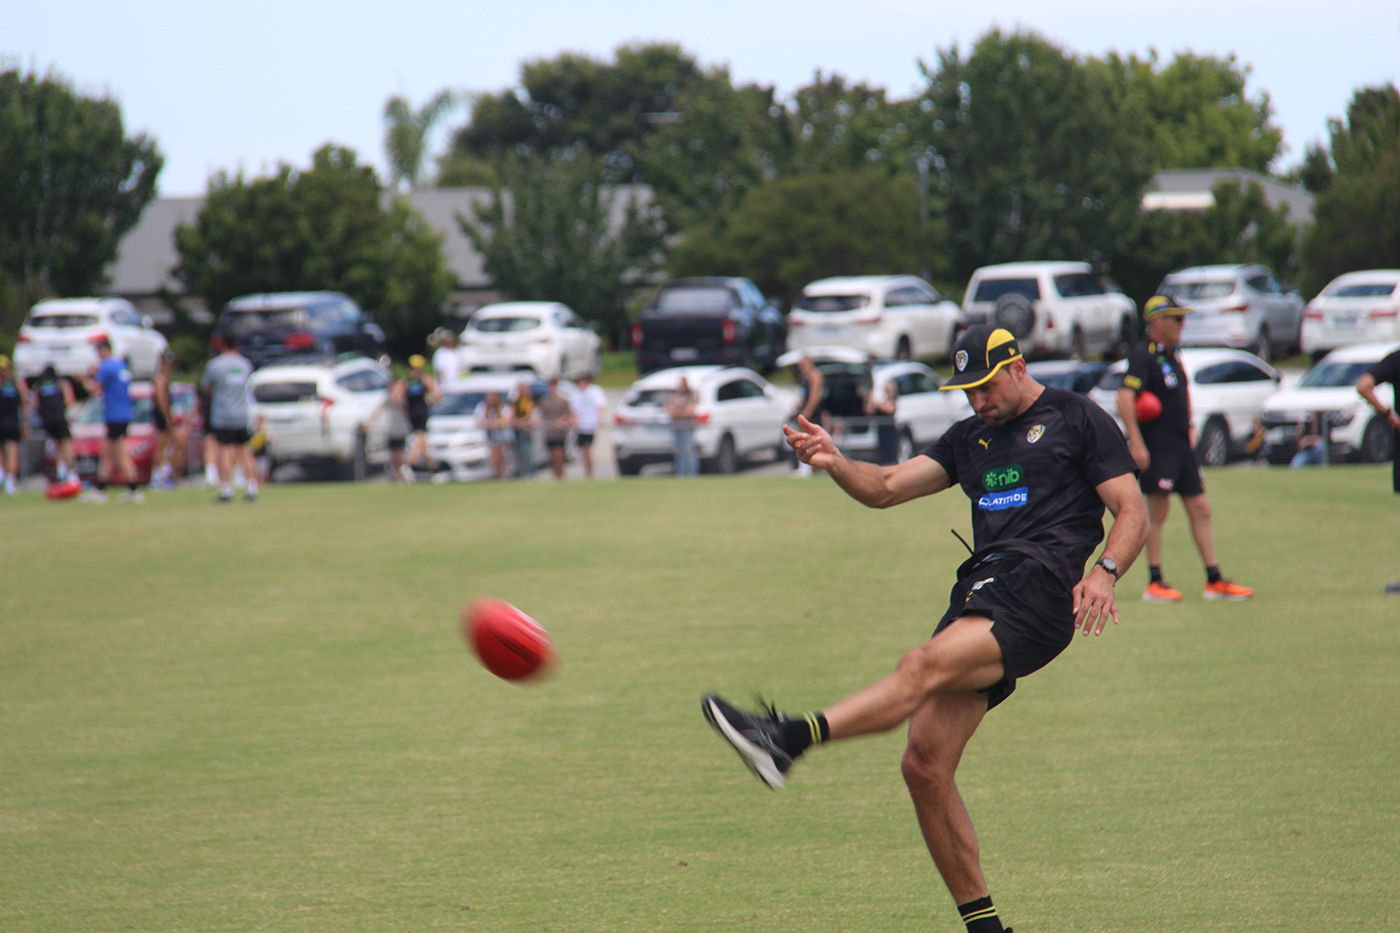 summer sessions afl Richmond tigers footy cardinia summer sessions tuesday